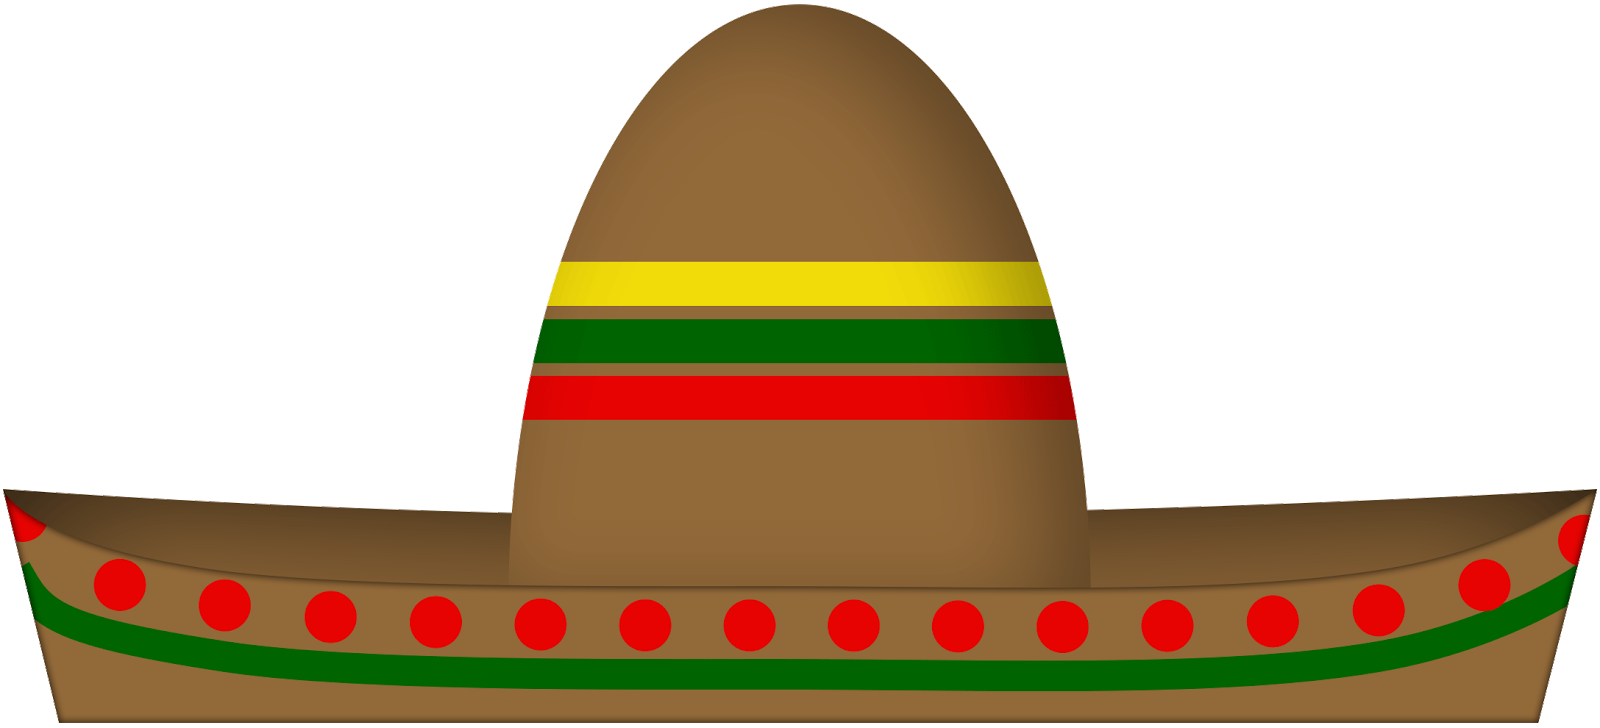 Images For  Sombrero Png - Clipart library - Clipart library